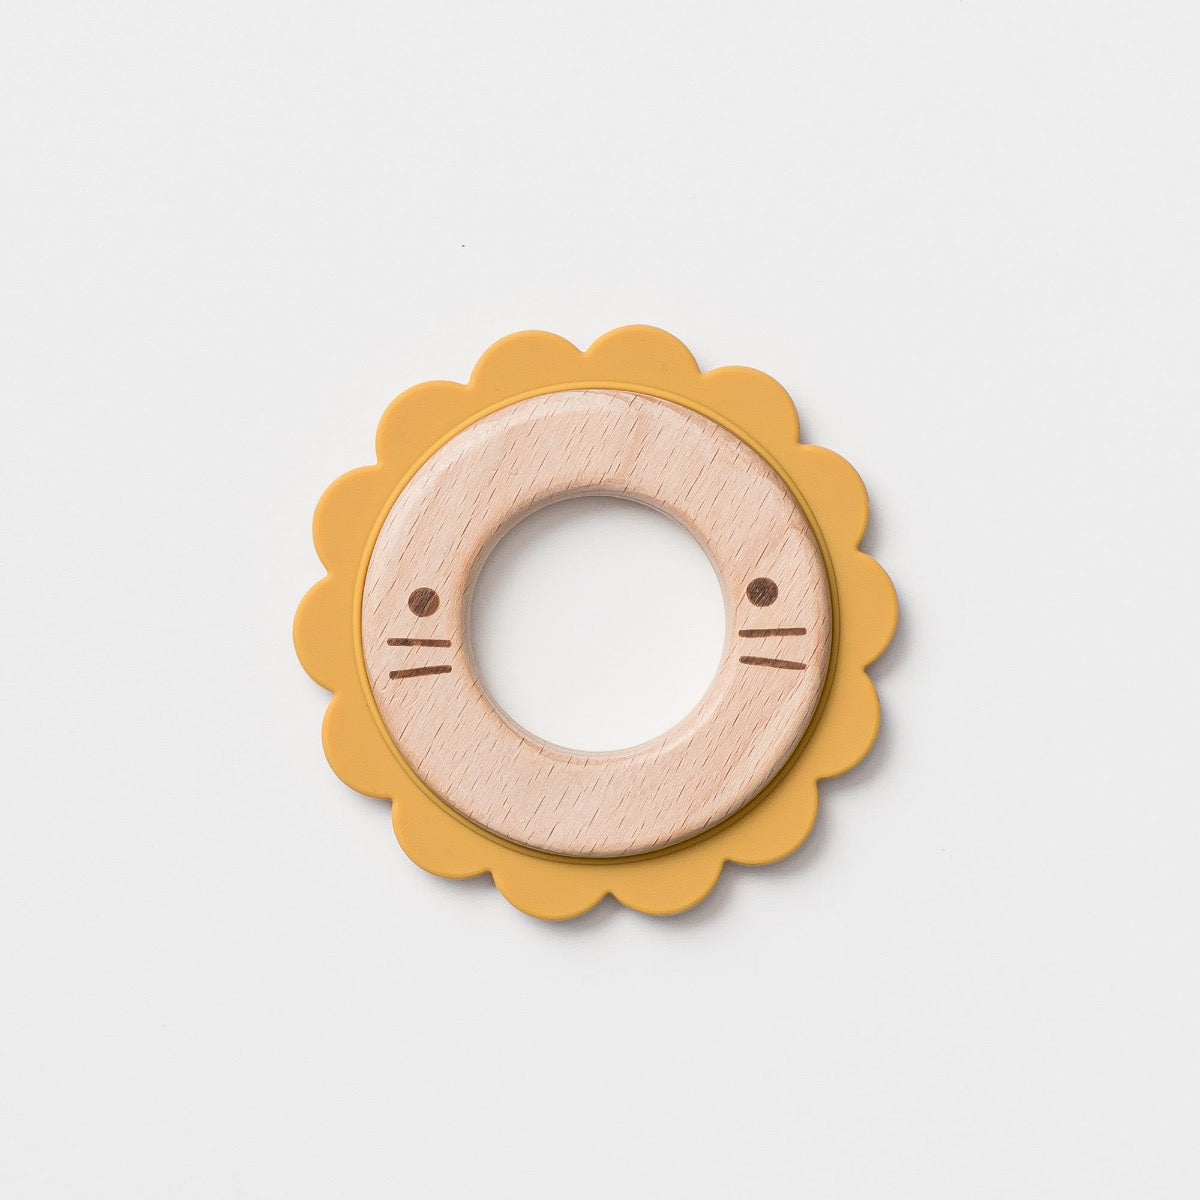 Over The Dandelions-Lee the Lion Teether Wood + Silicone